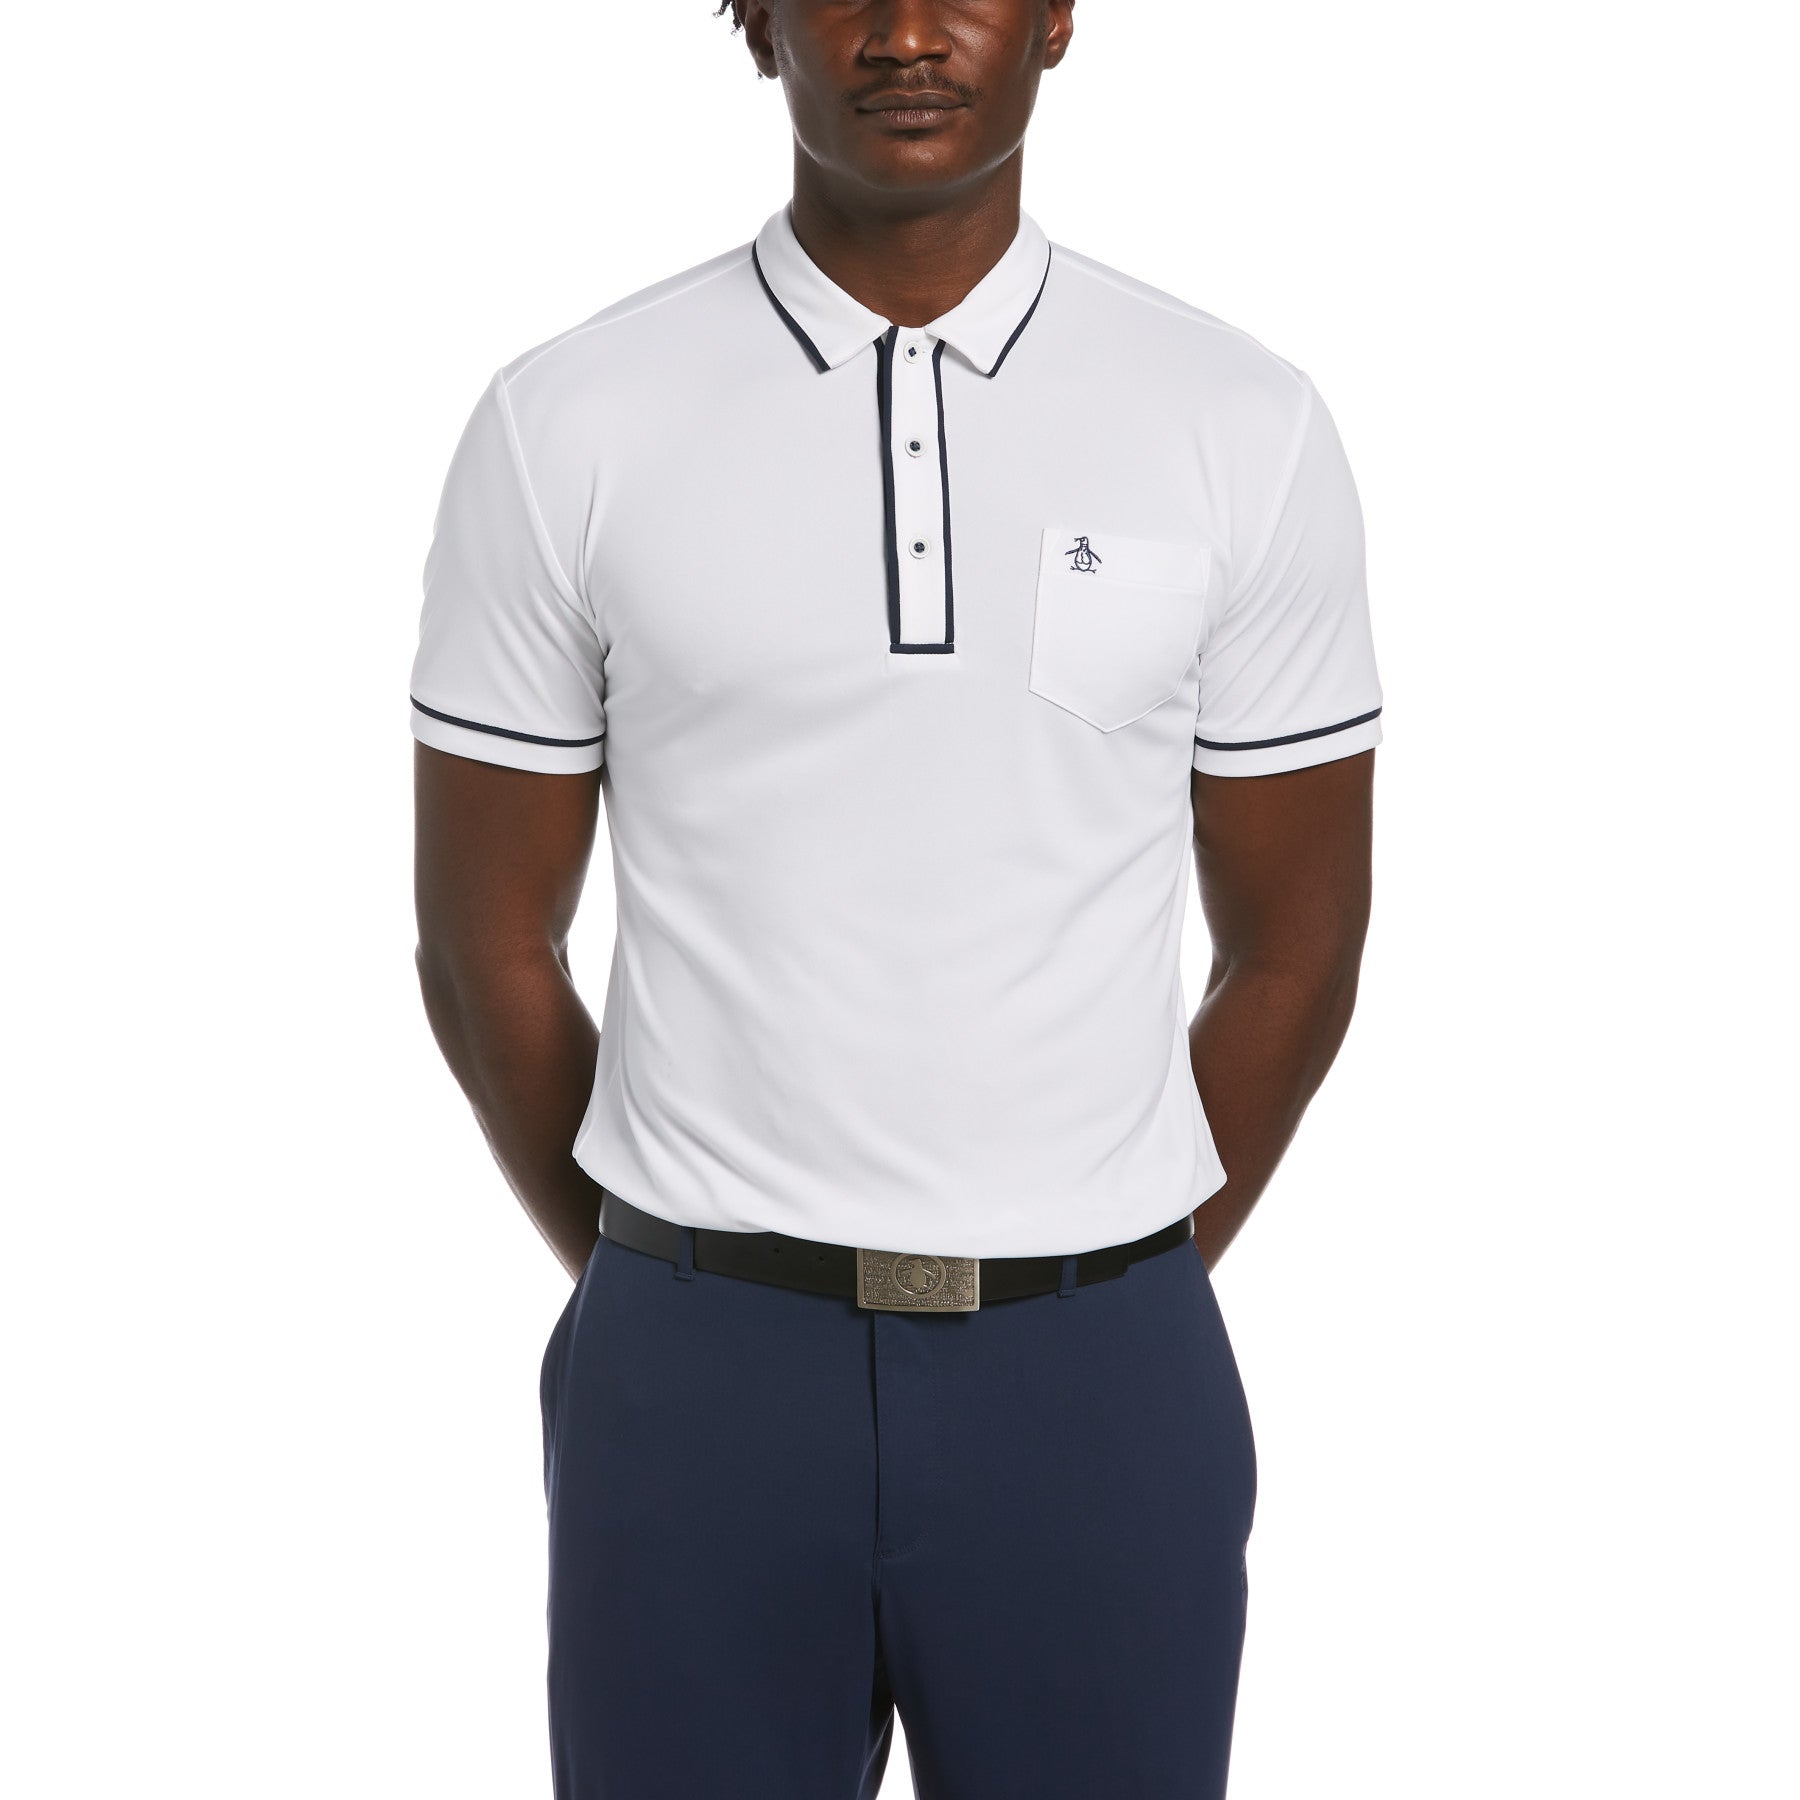 View Eco Performance Earl Golf Polo Shirt In Bright White information